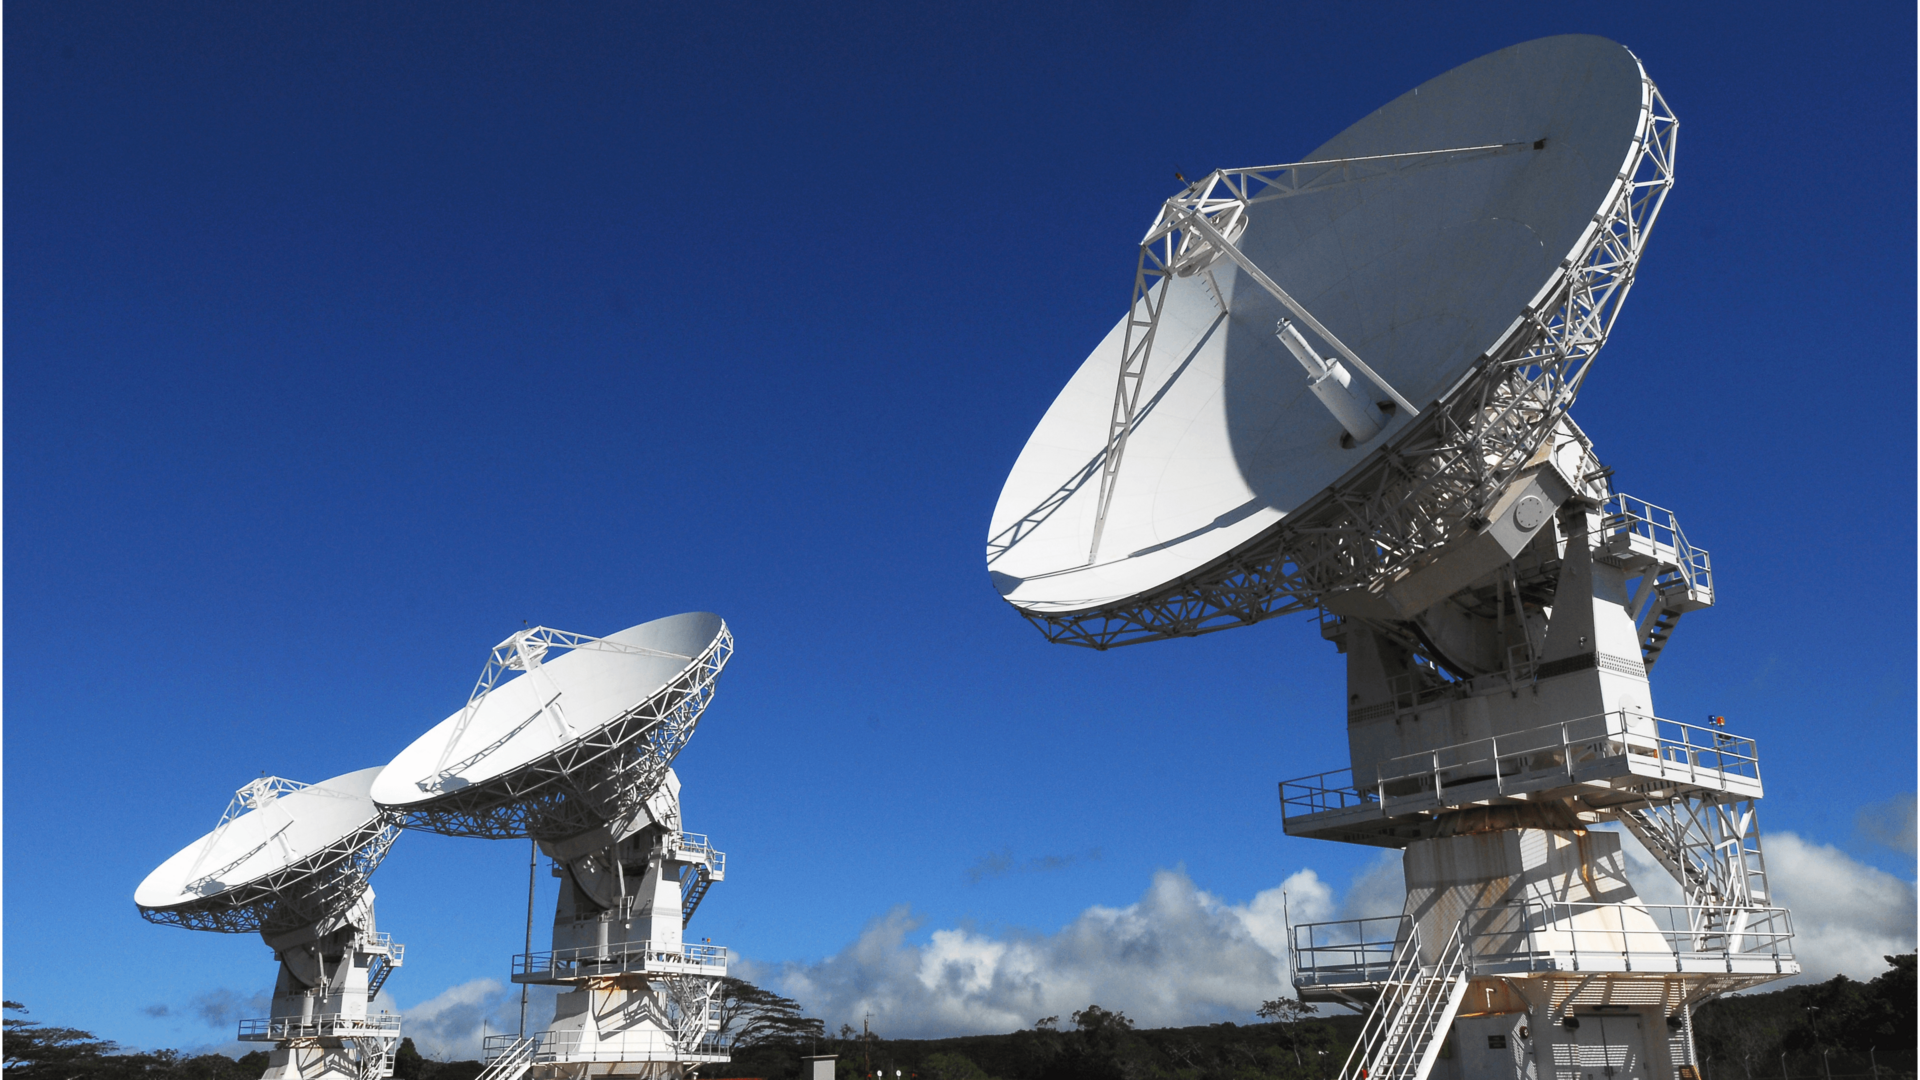 DoT to consult TRAI on satcom spectrum allocation and licensing